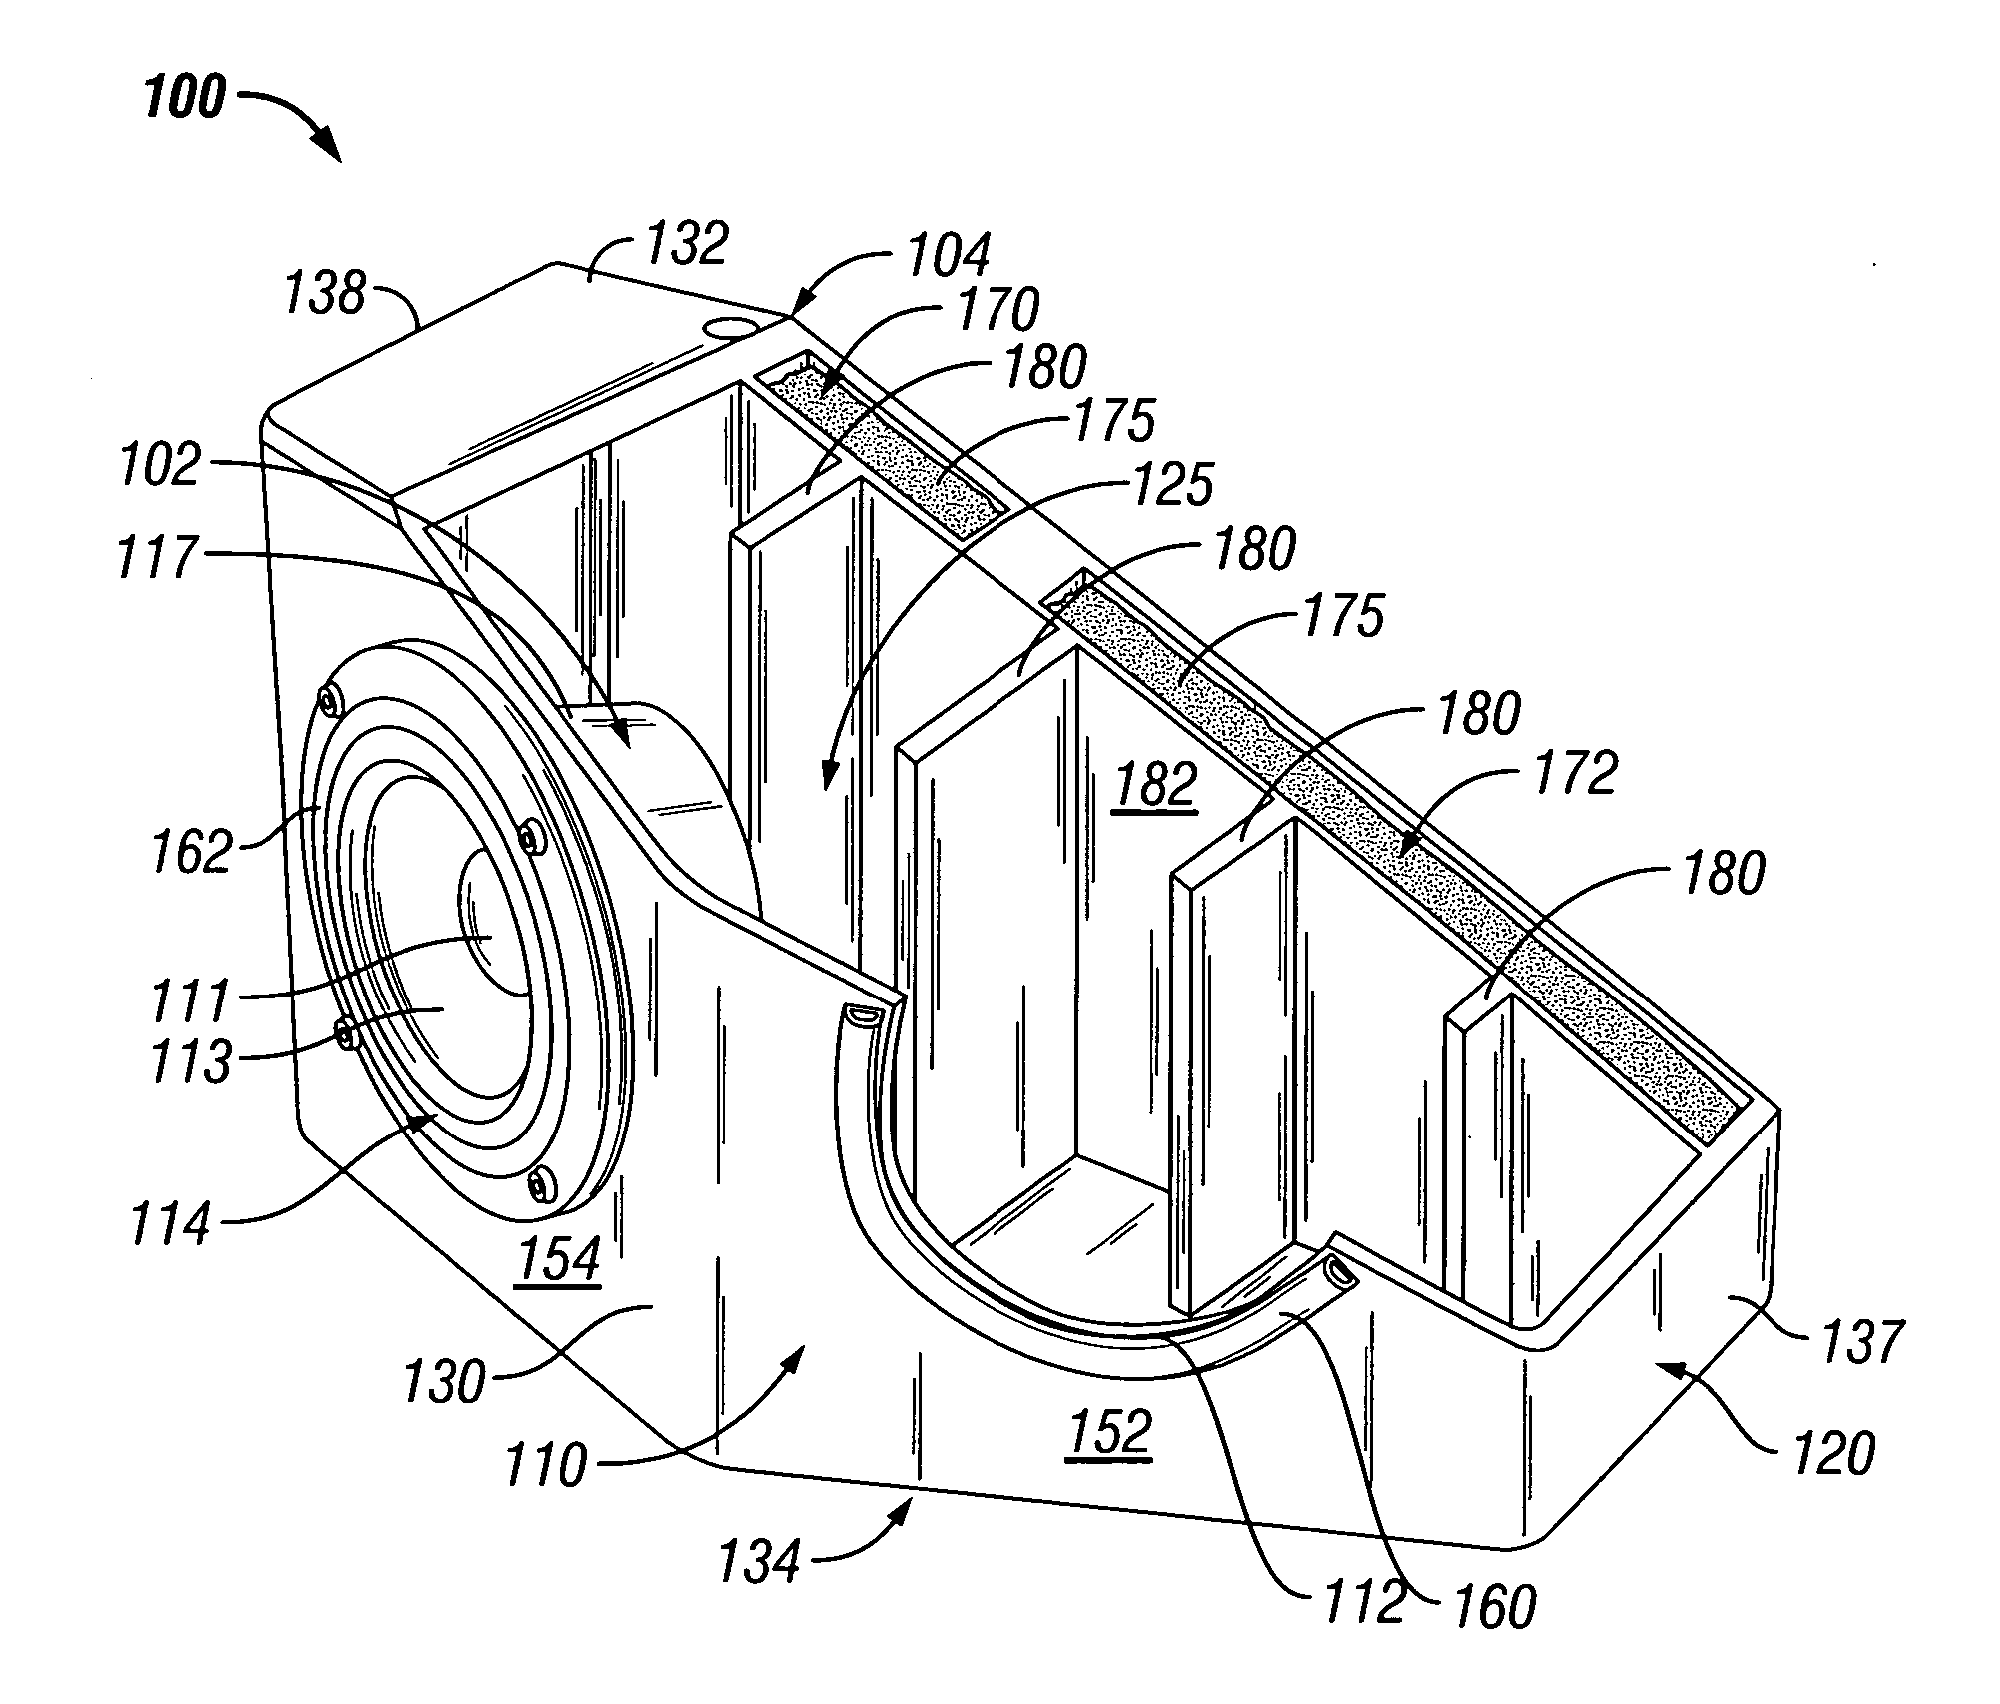 Speaker enclosure with a liquid chamber for mounting a speaker driver